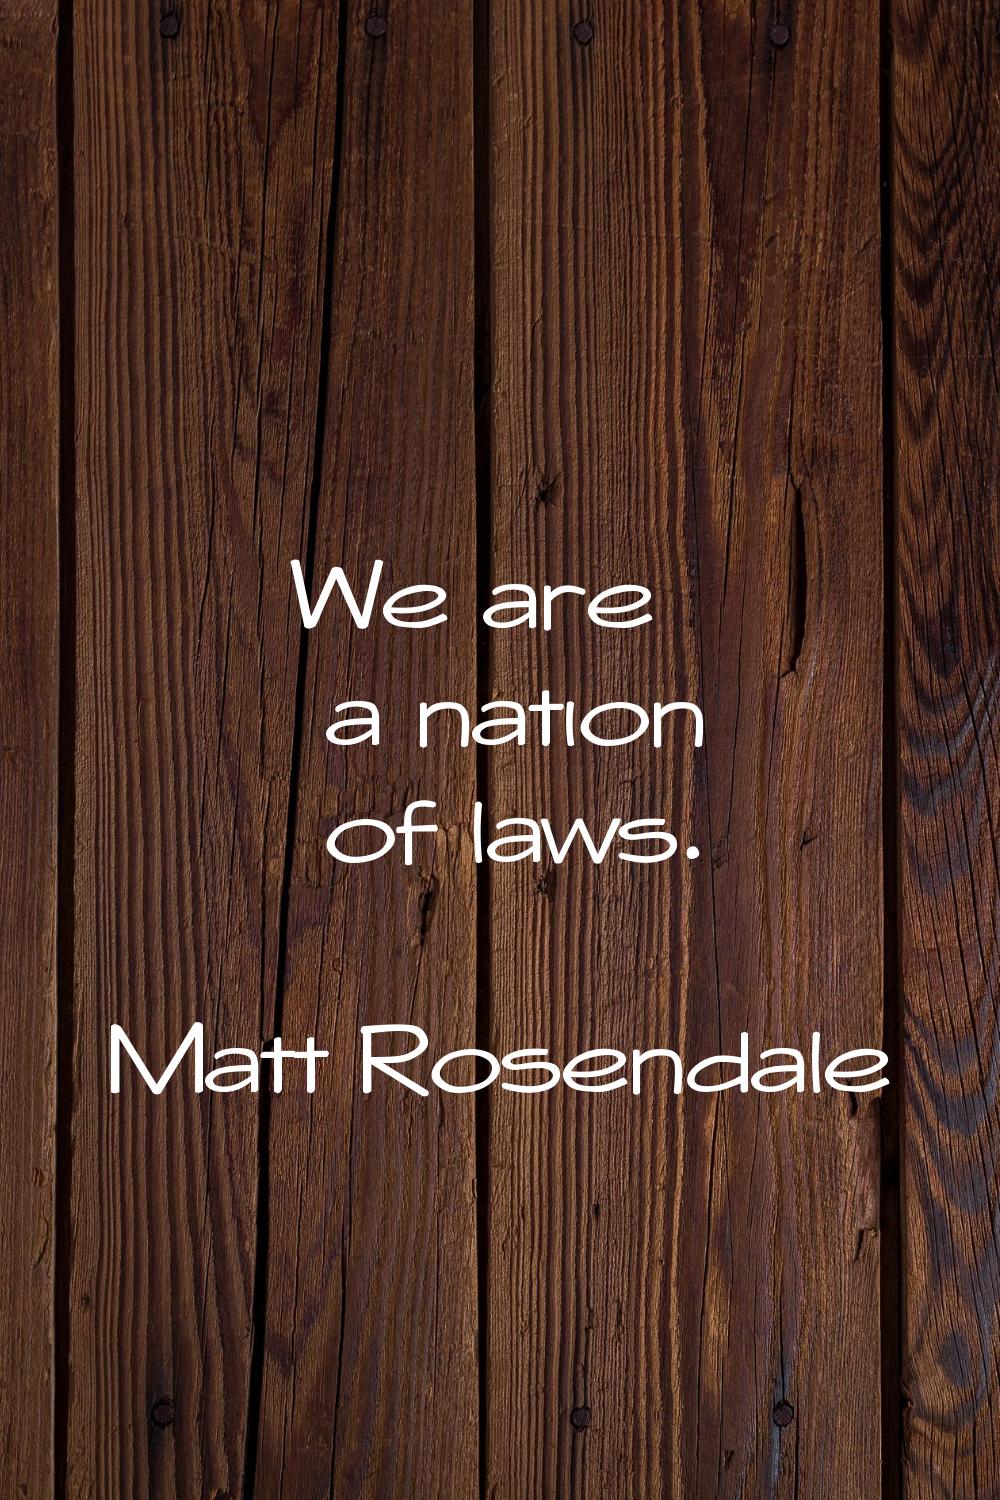 We are a nation of laws.